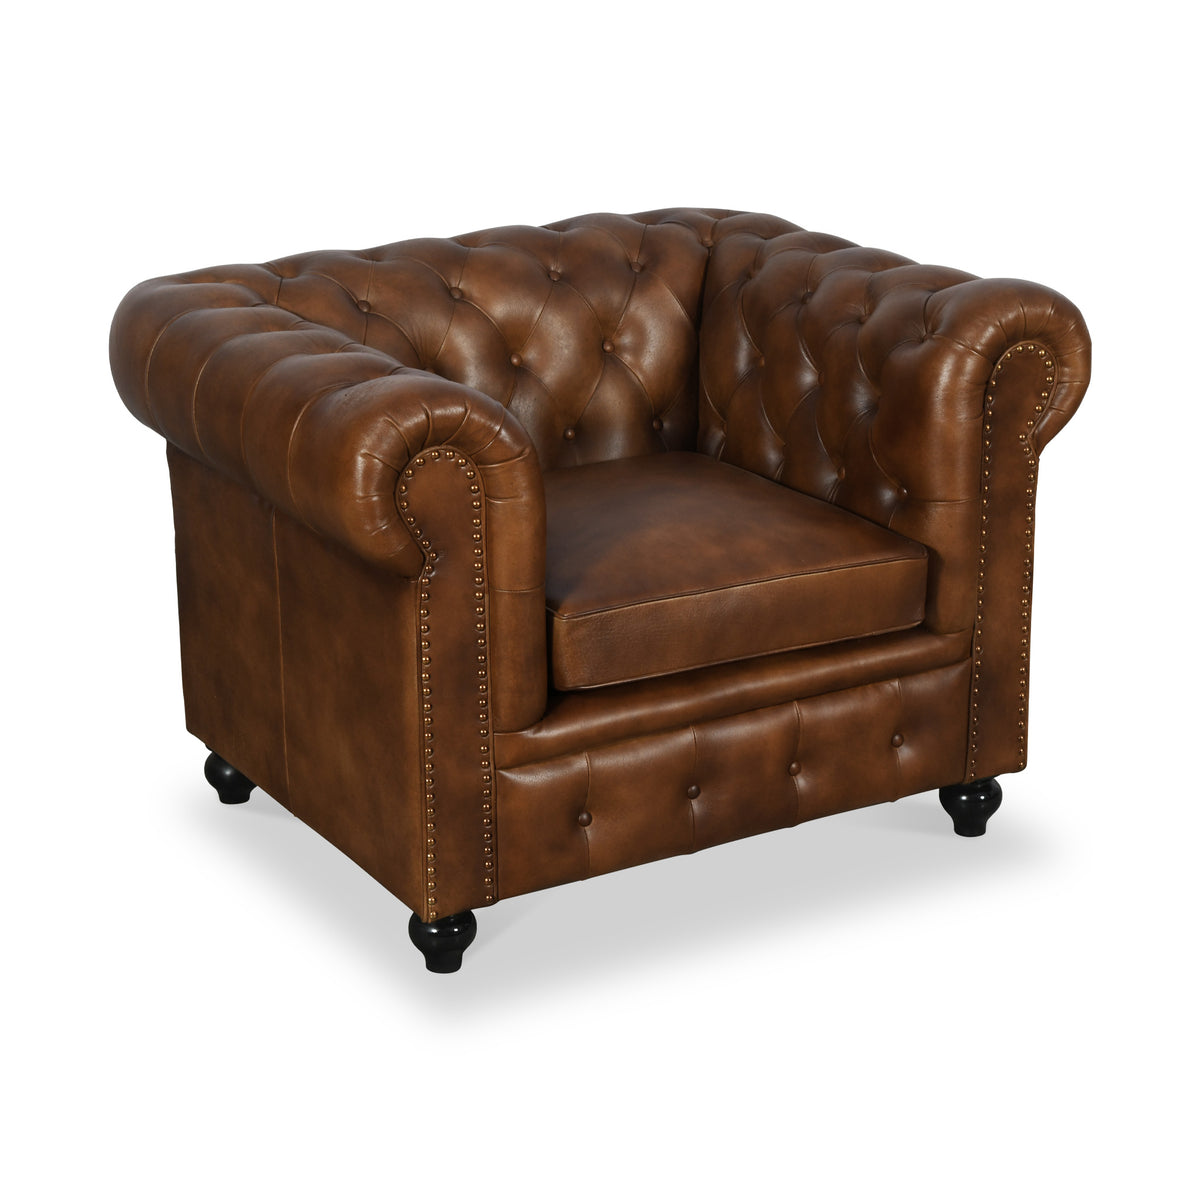 Nina Leather Chesterfield Armchair from Roseland